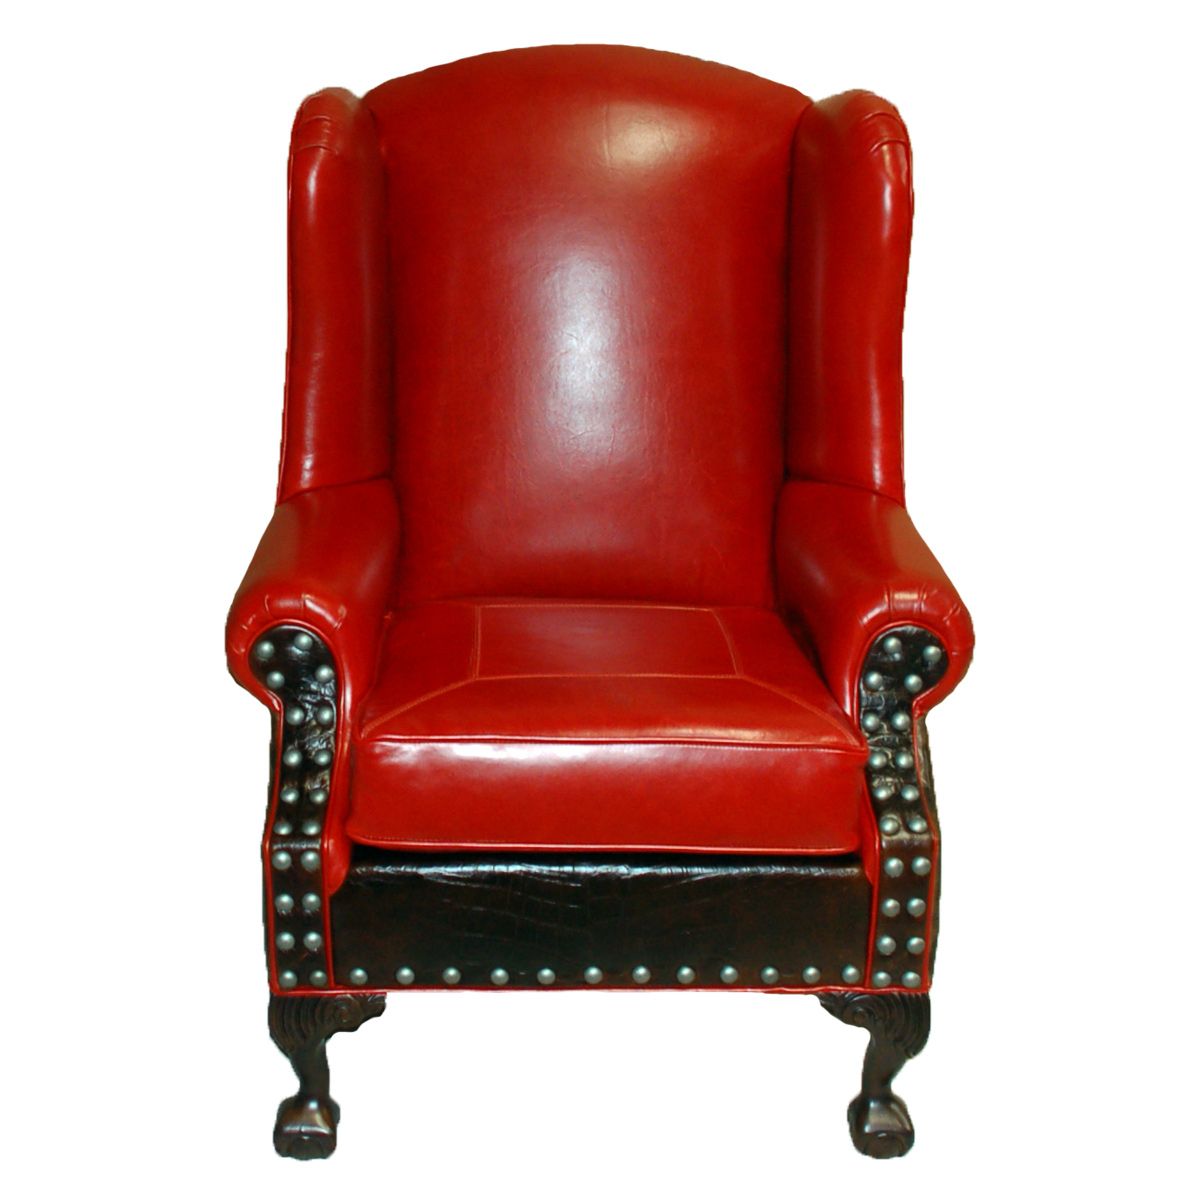 Sweetwater Wingback Chairs Regarding Preferred Wild Horse Saloon Wing Back Chair (View 11 of 20)